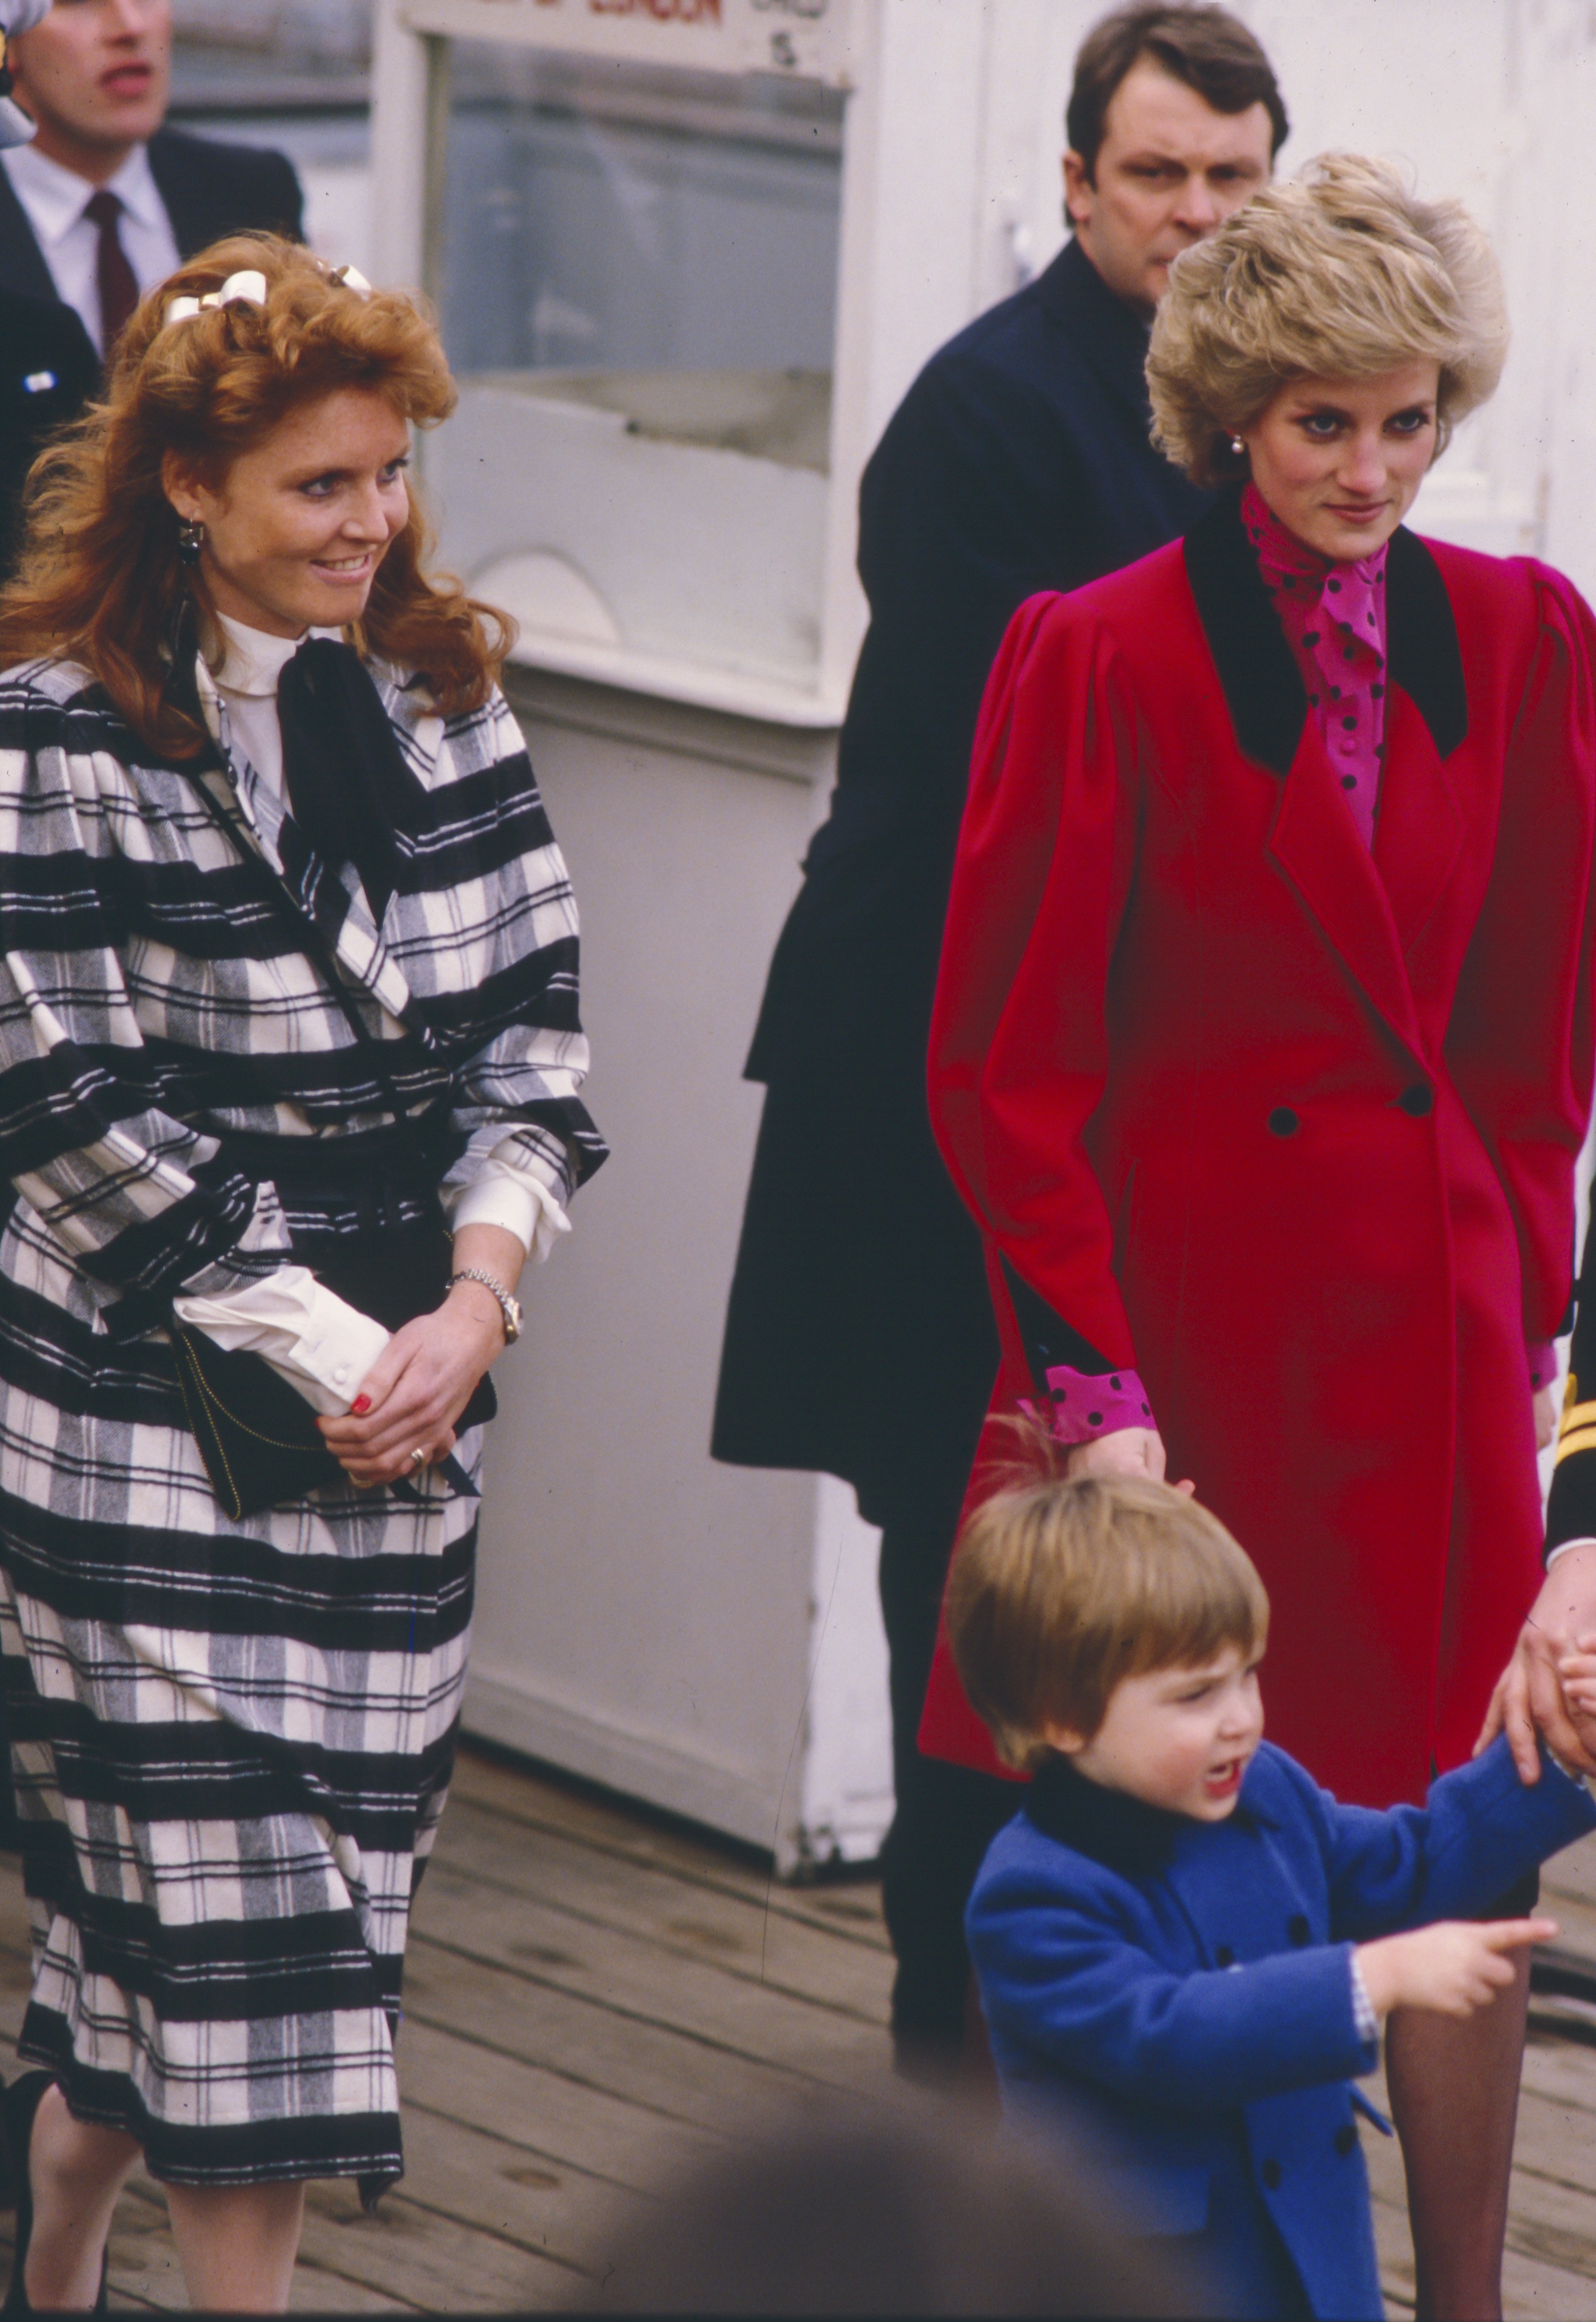 The Princess of Wales, Diana, accompanied by Sarah Ferguson on a visit to HMS Brazen, by the River Thames on February 5, 1986 in London, United Kingdom. / Source: Getty Images